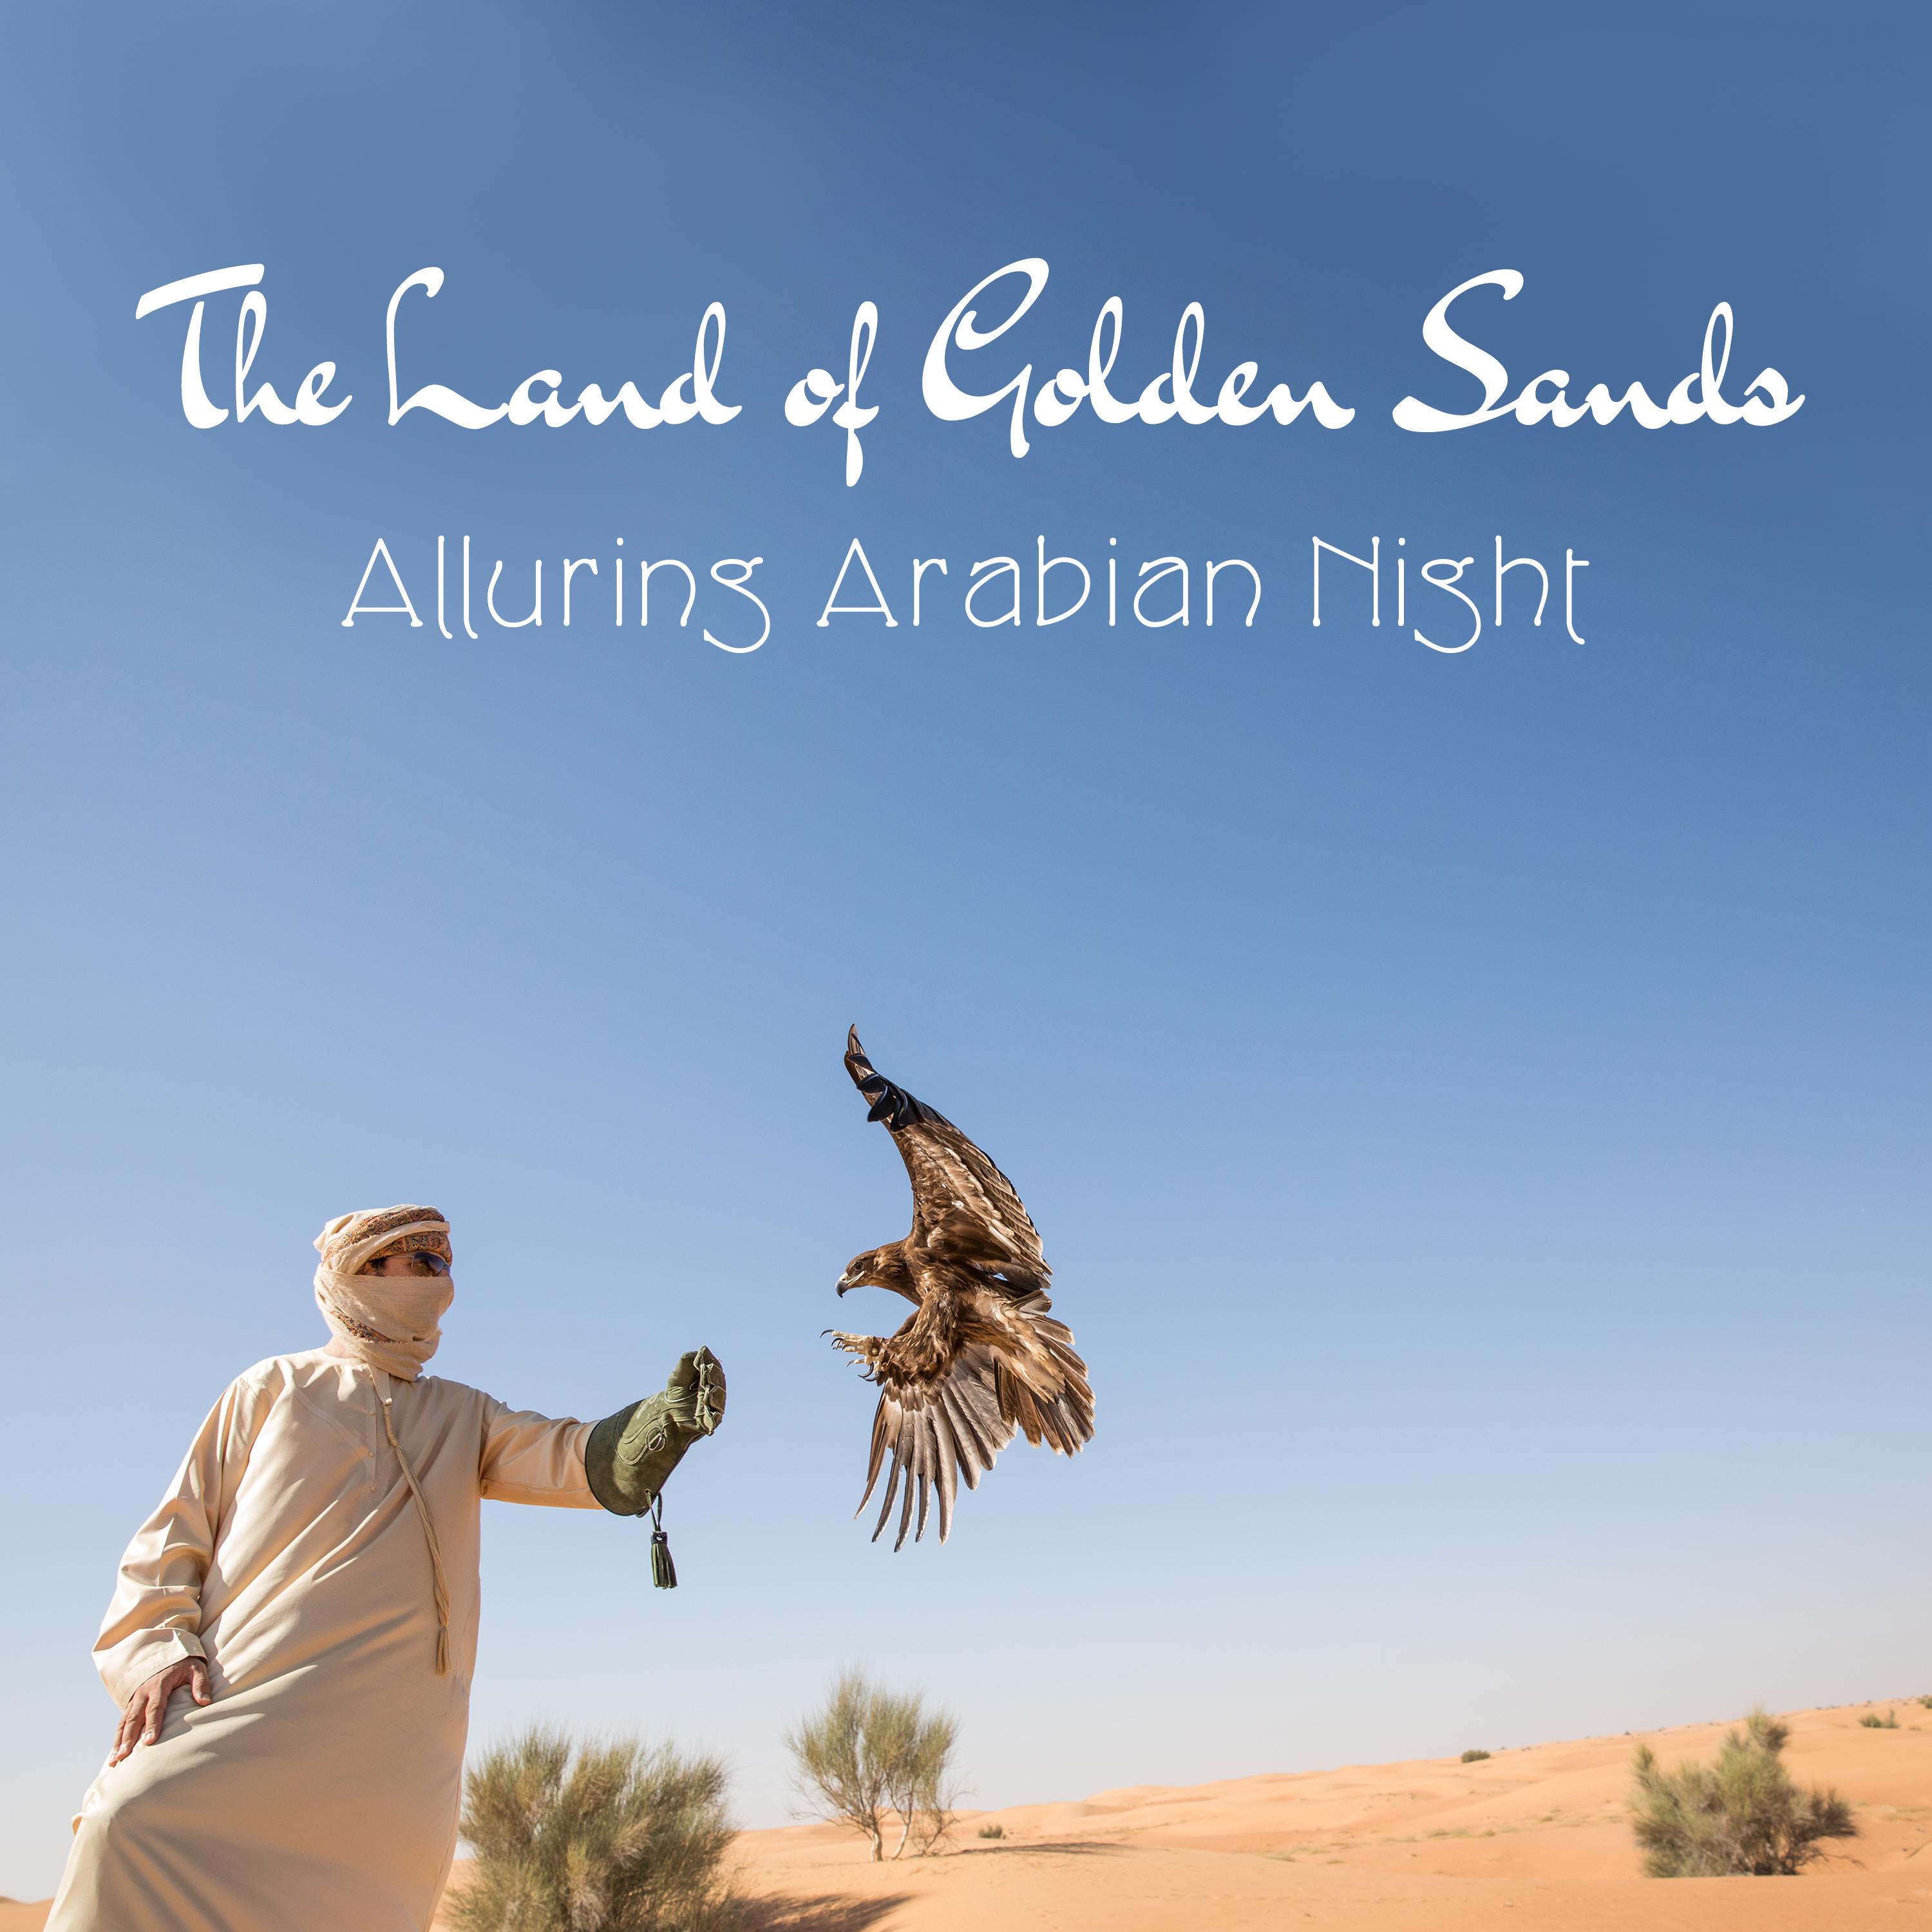 The Land of Golden Sands (Alluring Arabian Night, Exotic New Age Music, Deep Arabic Music, Traditional Dances)